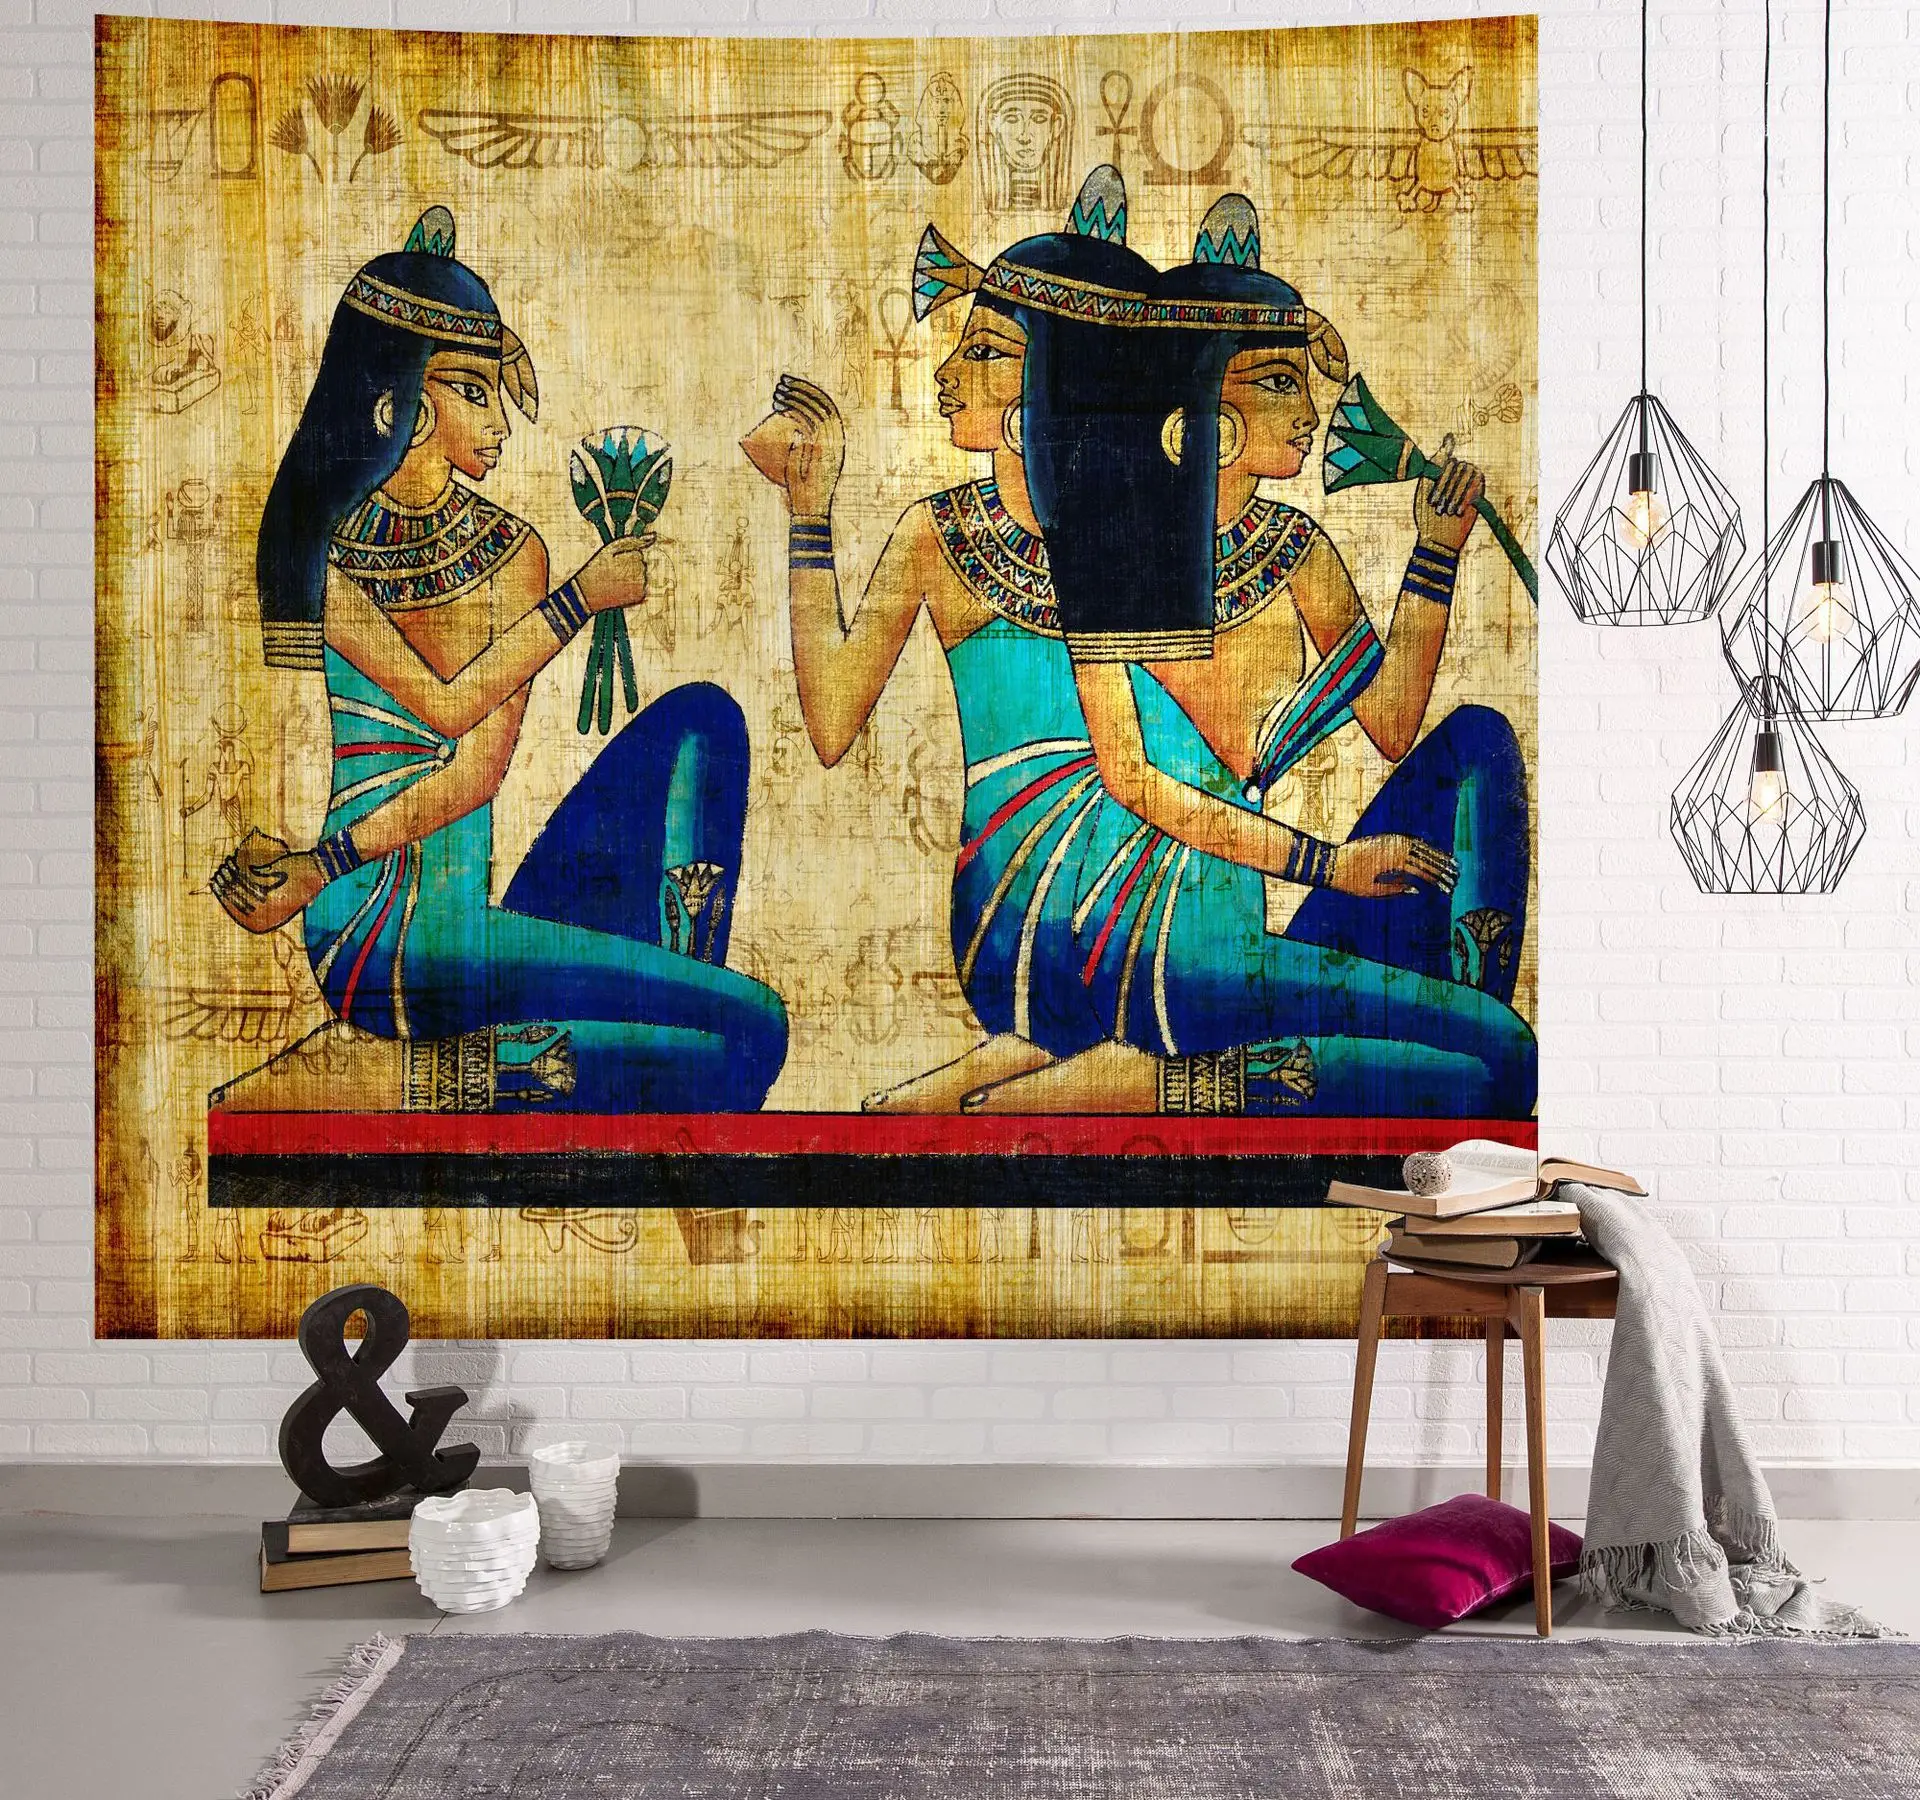 

Ancient Egyptian Tribal Savage Tapestry Wall Hanging Home Dorm Decor Bedspread Tapiz Throw Art Tapestry Cloth Home Decor